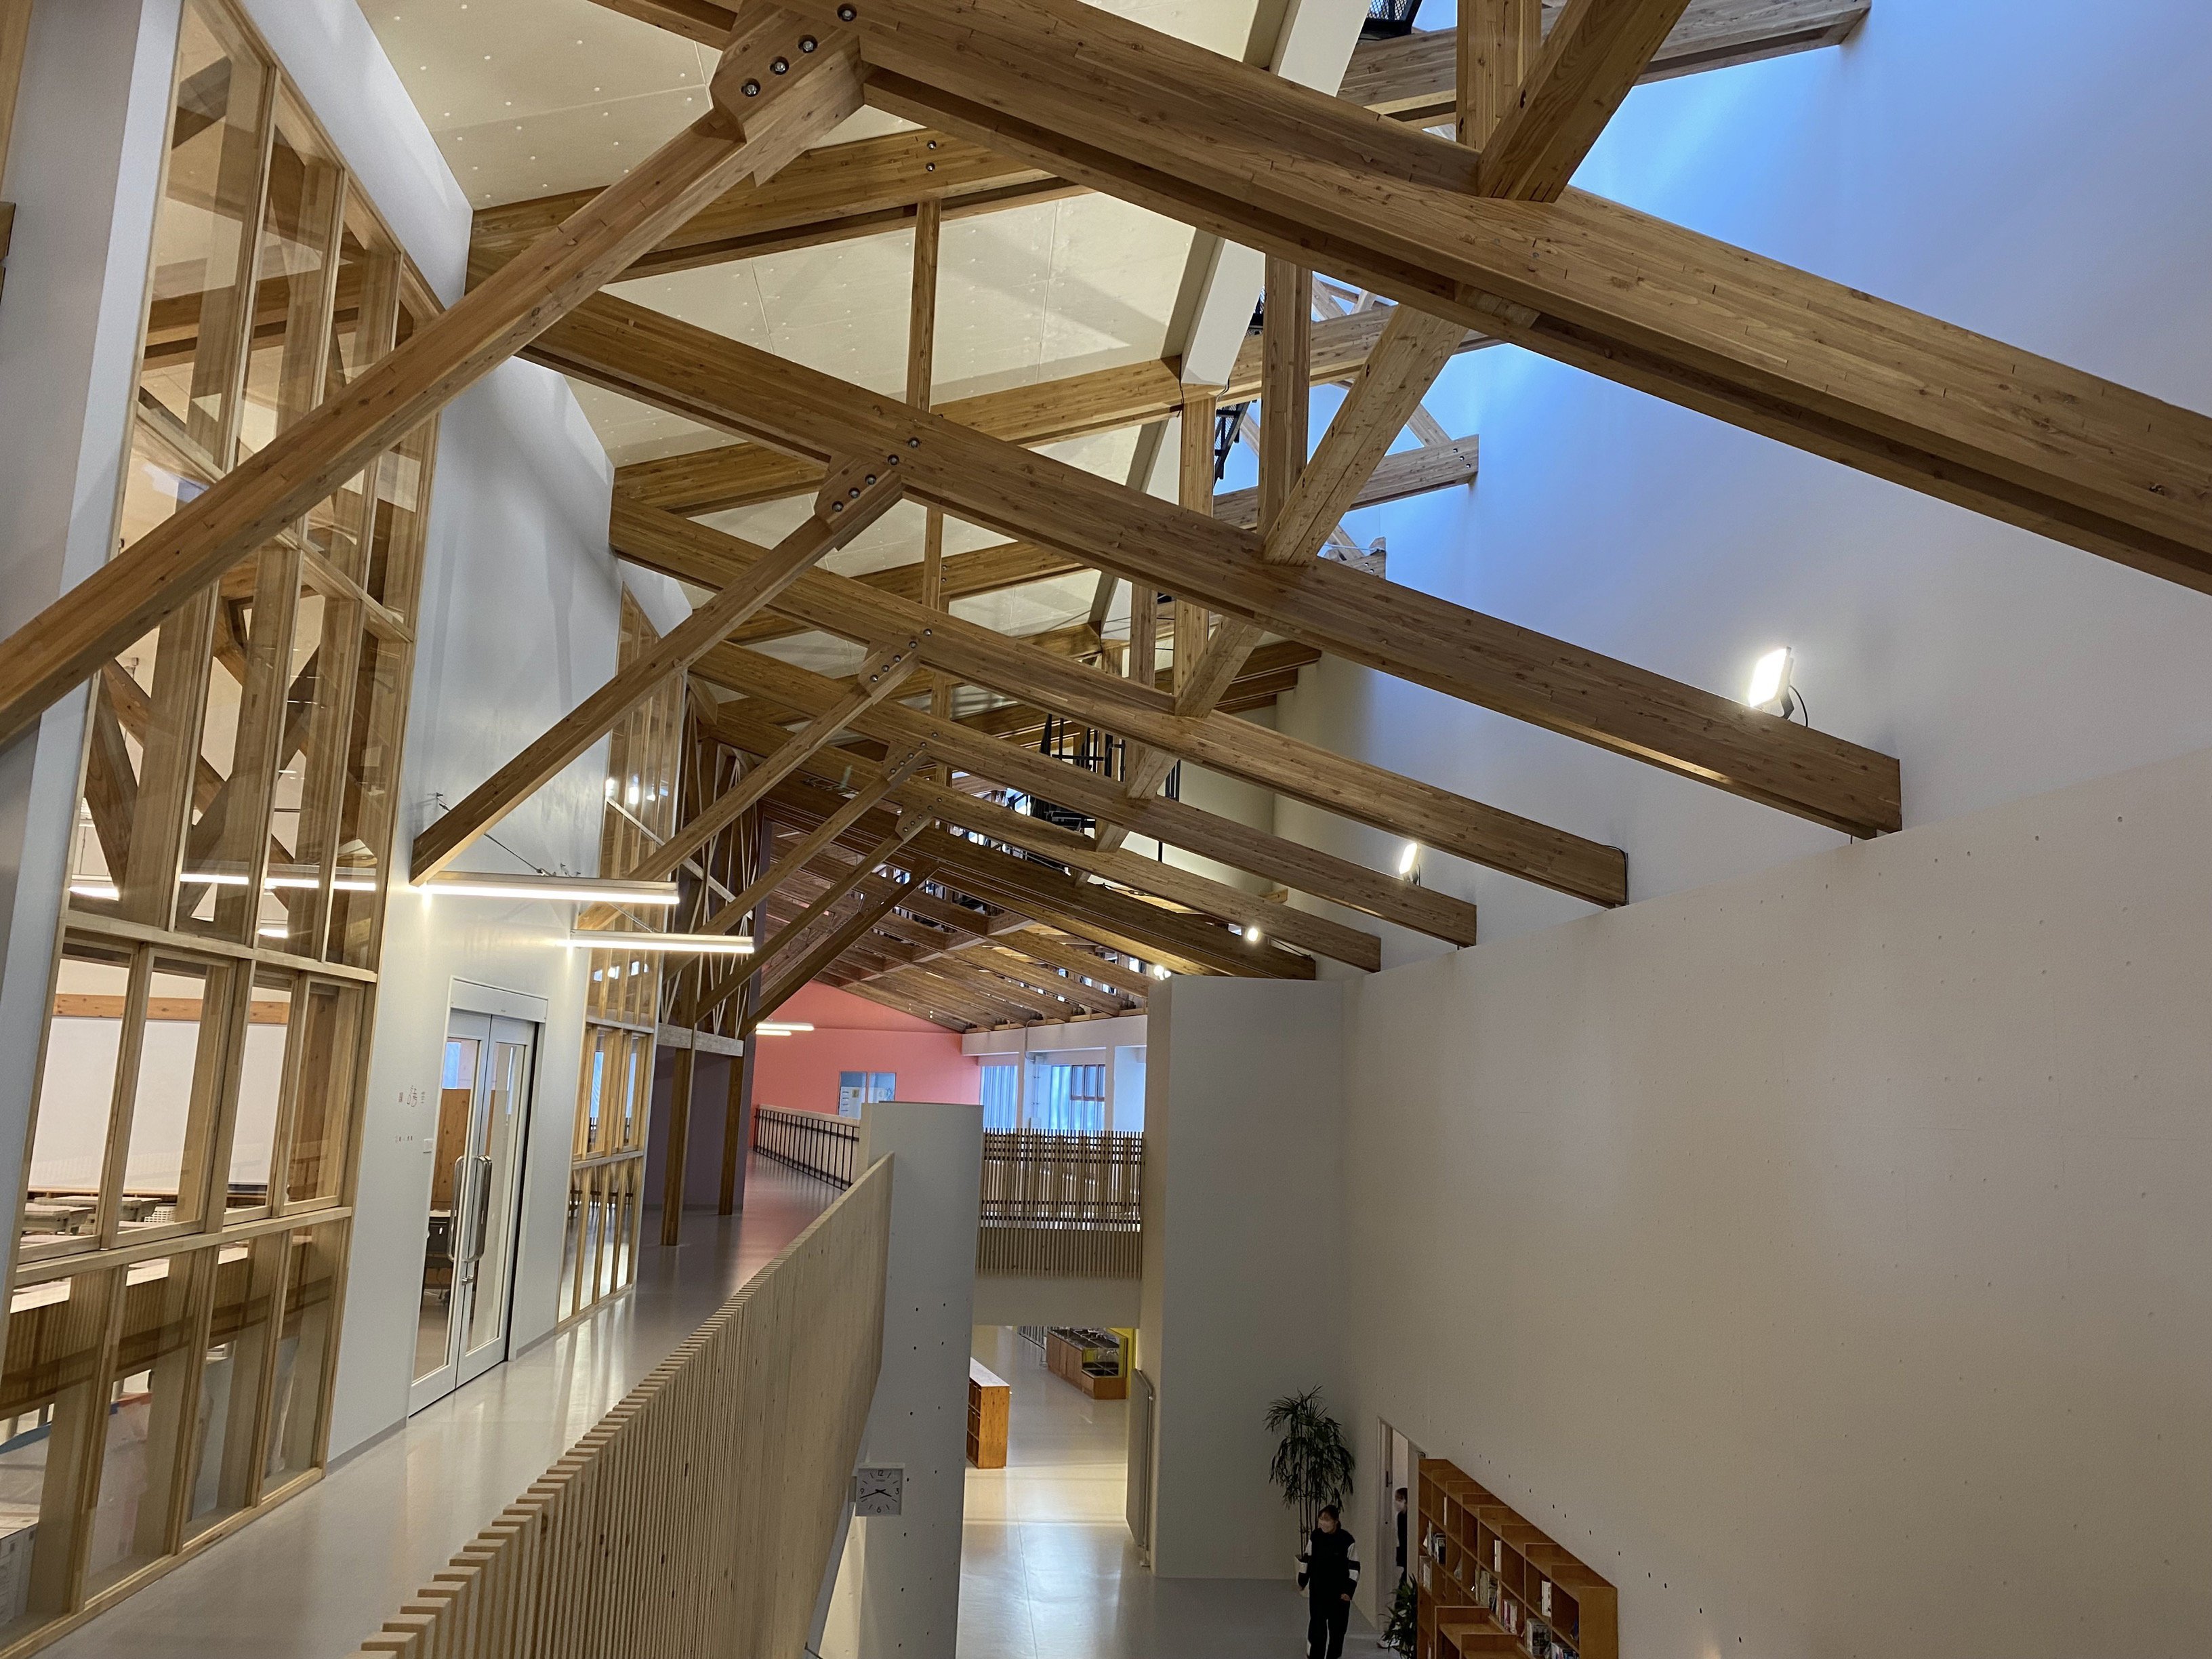 Interior of the school building that utilizes timber from our forest